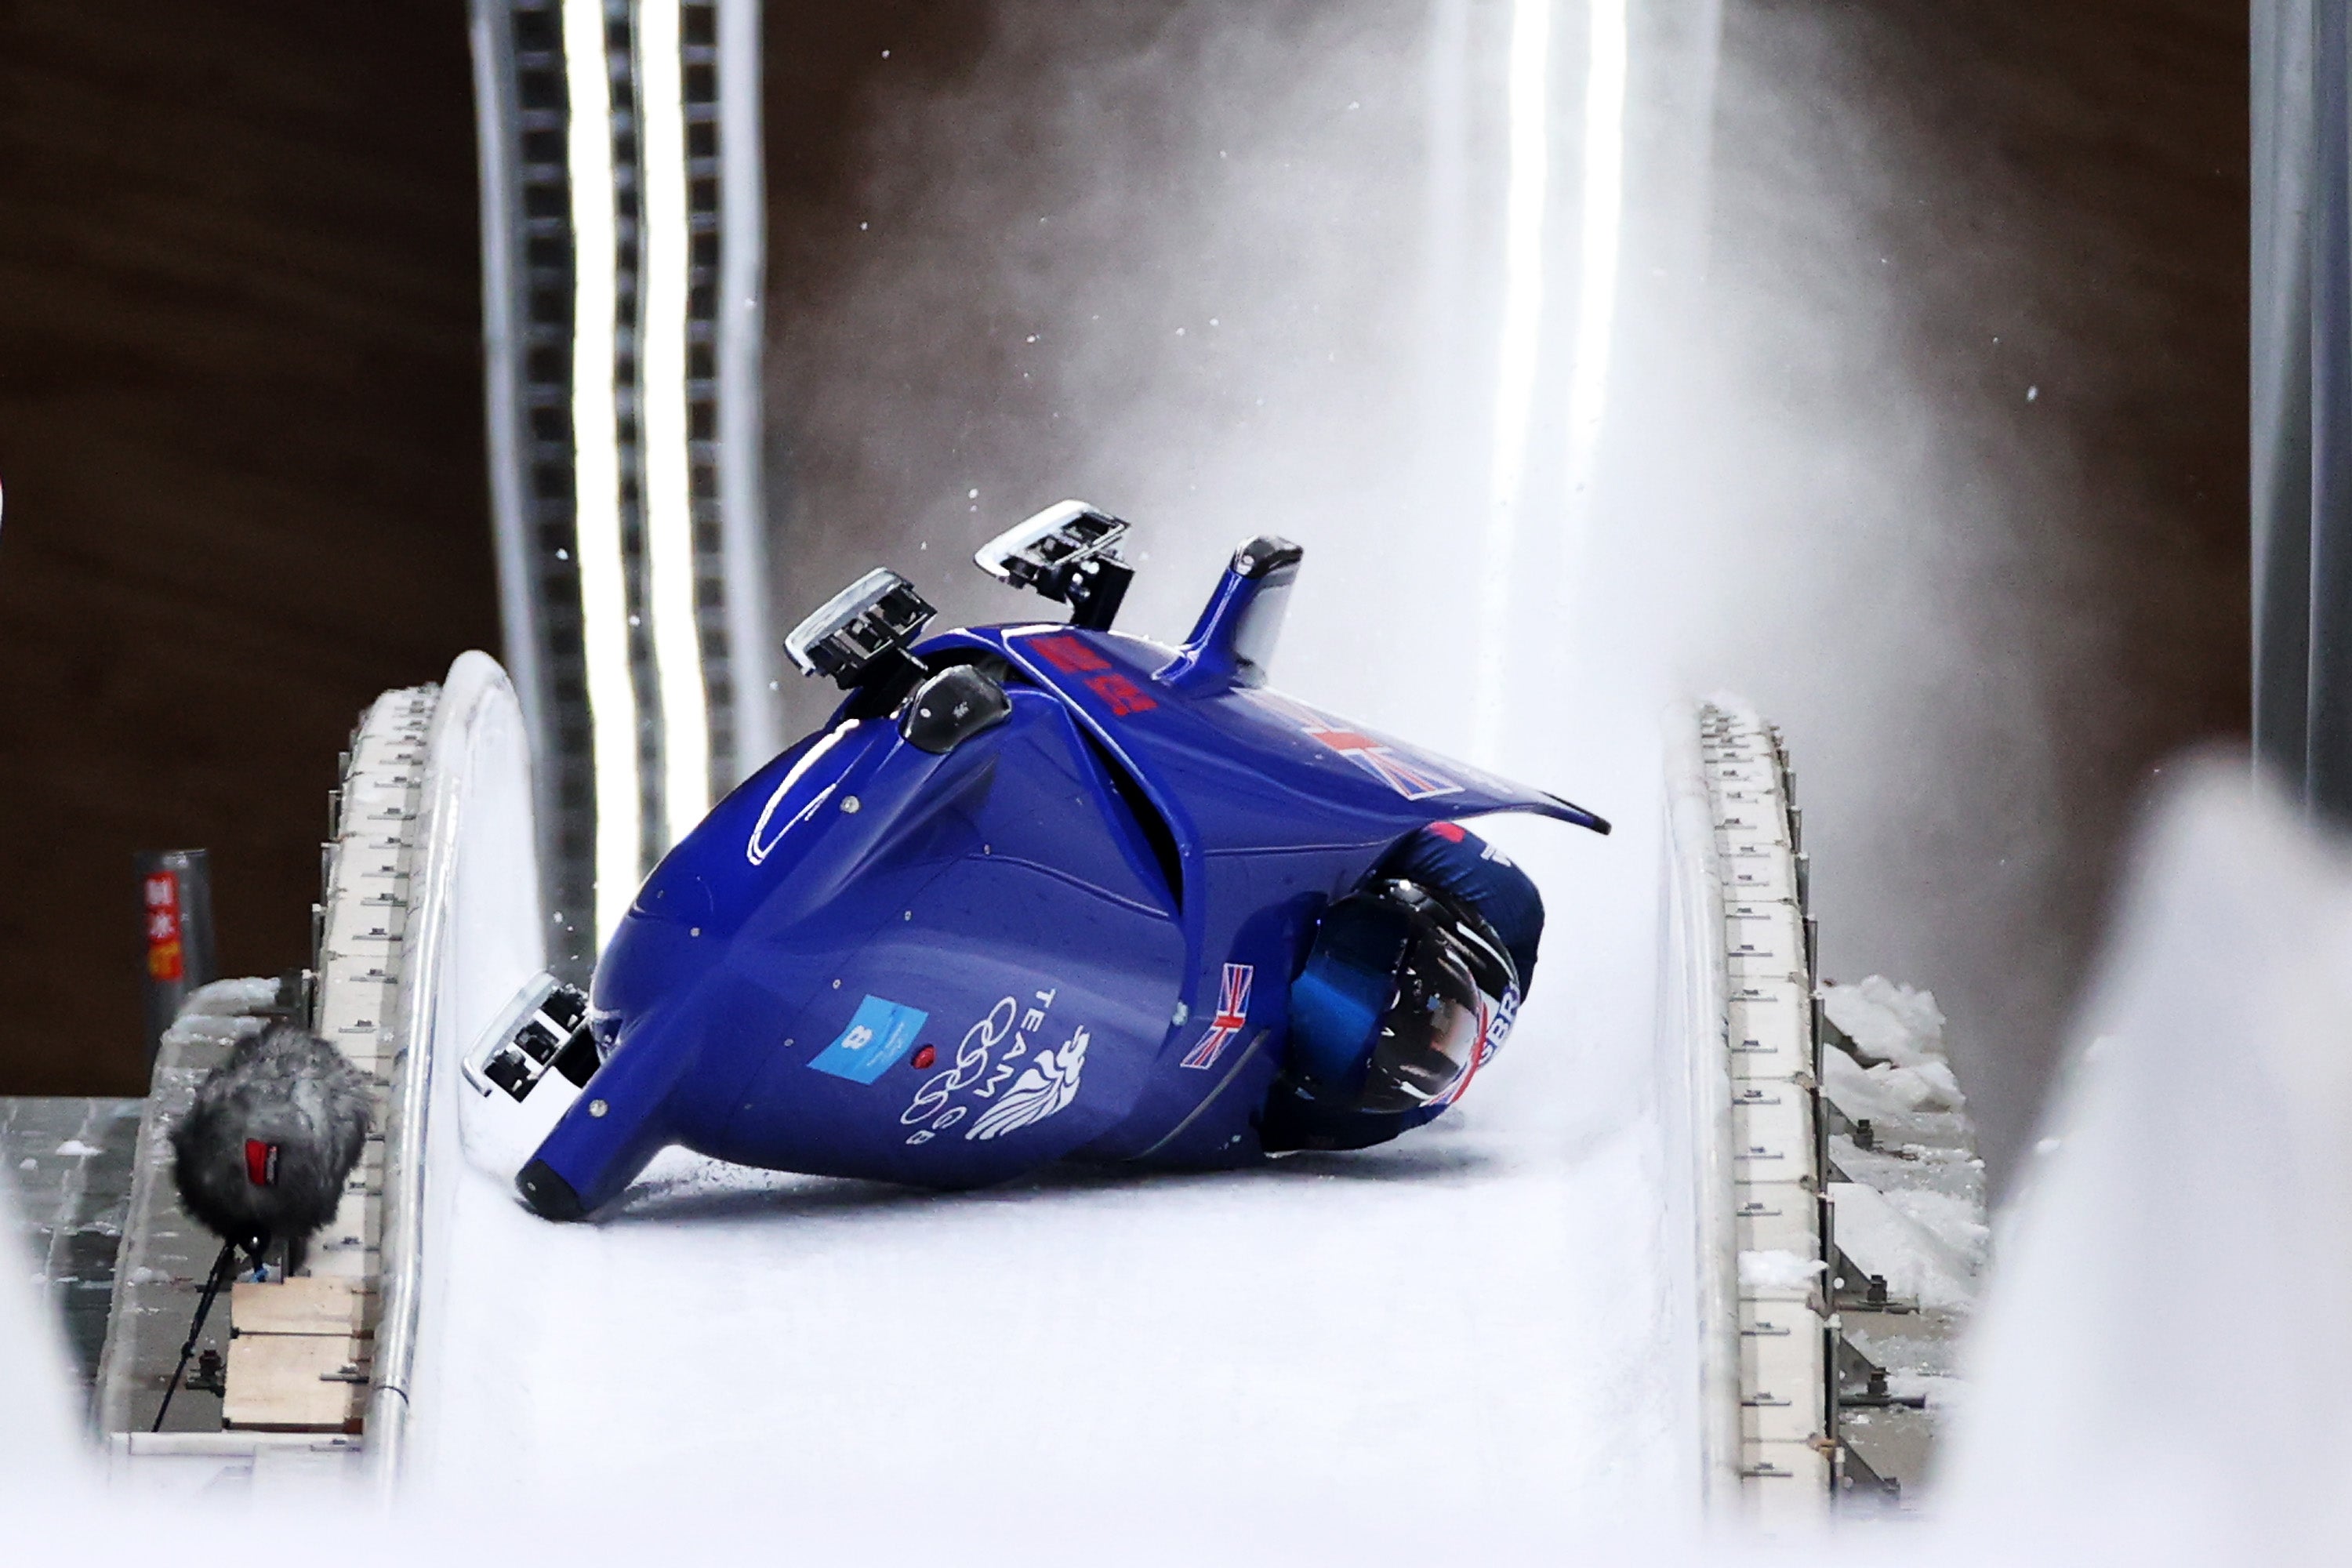 Brad Hall and Nick Gleeson of Team Great Britain crash during the 2-man Bobsleigh Heat 3